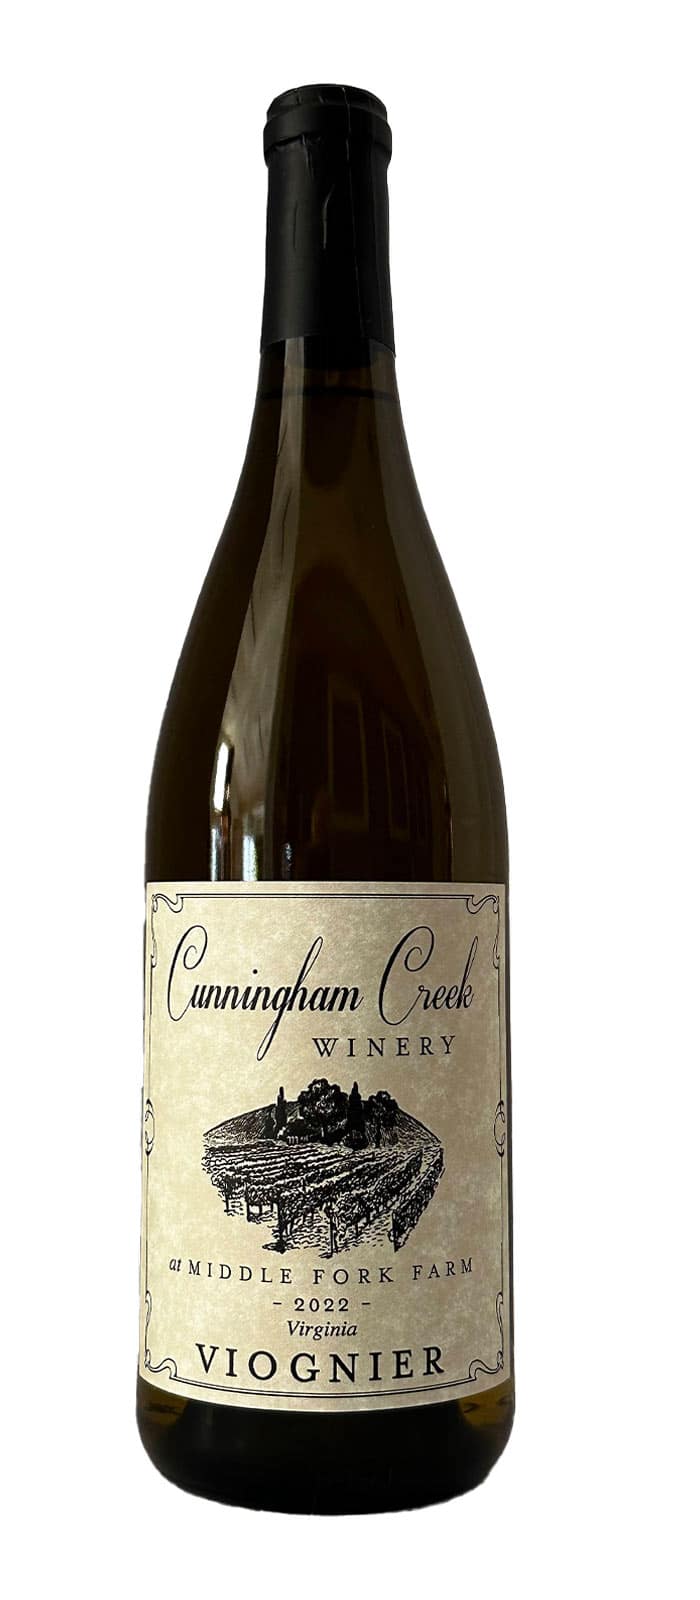 Bottle of Cunningham Creek Winery, Middle Fork Farm, 2022 Viognier, Gold Medal, Virginia Governor's Cup Wine Competition.